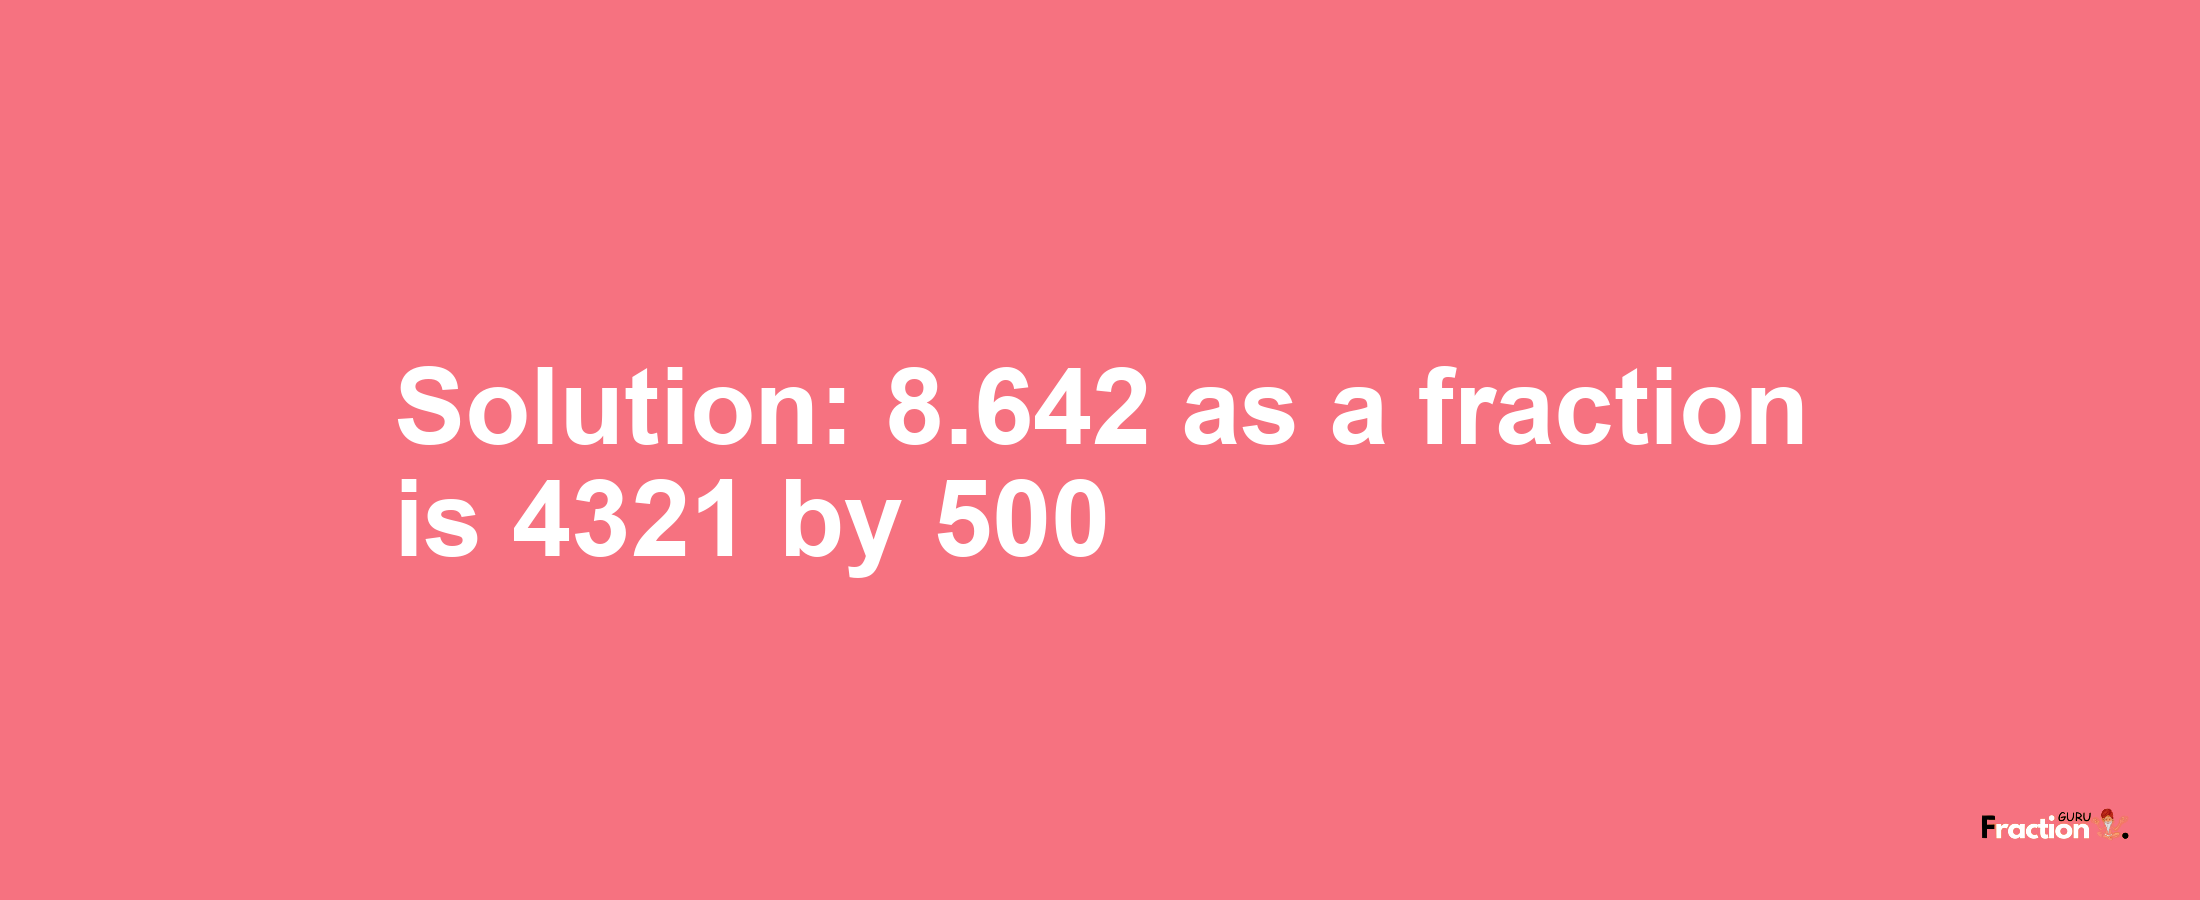 Solution:8.642 as a fraction is 4321/500